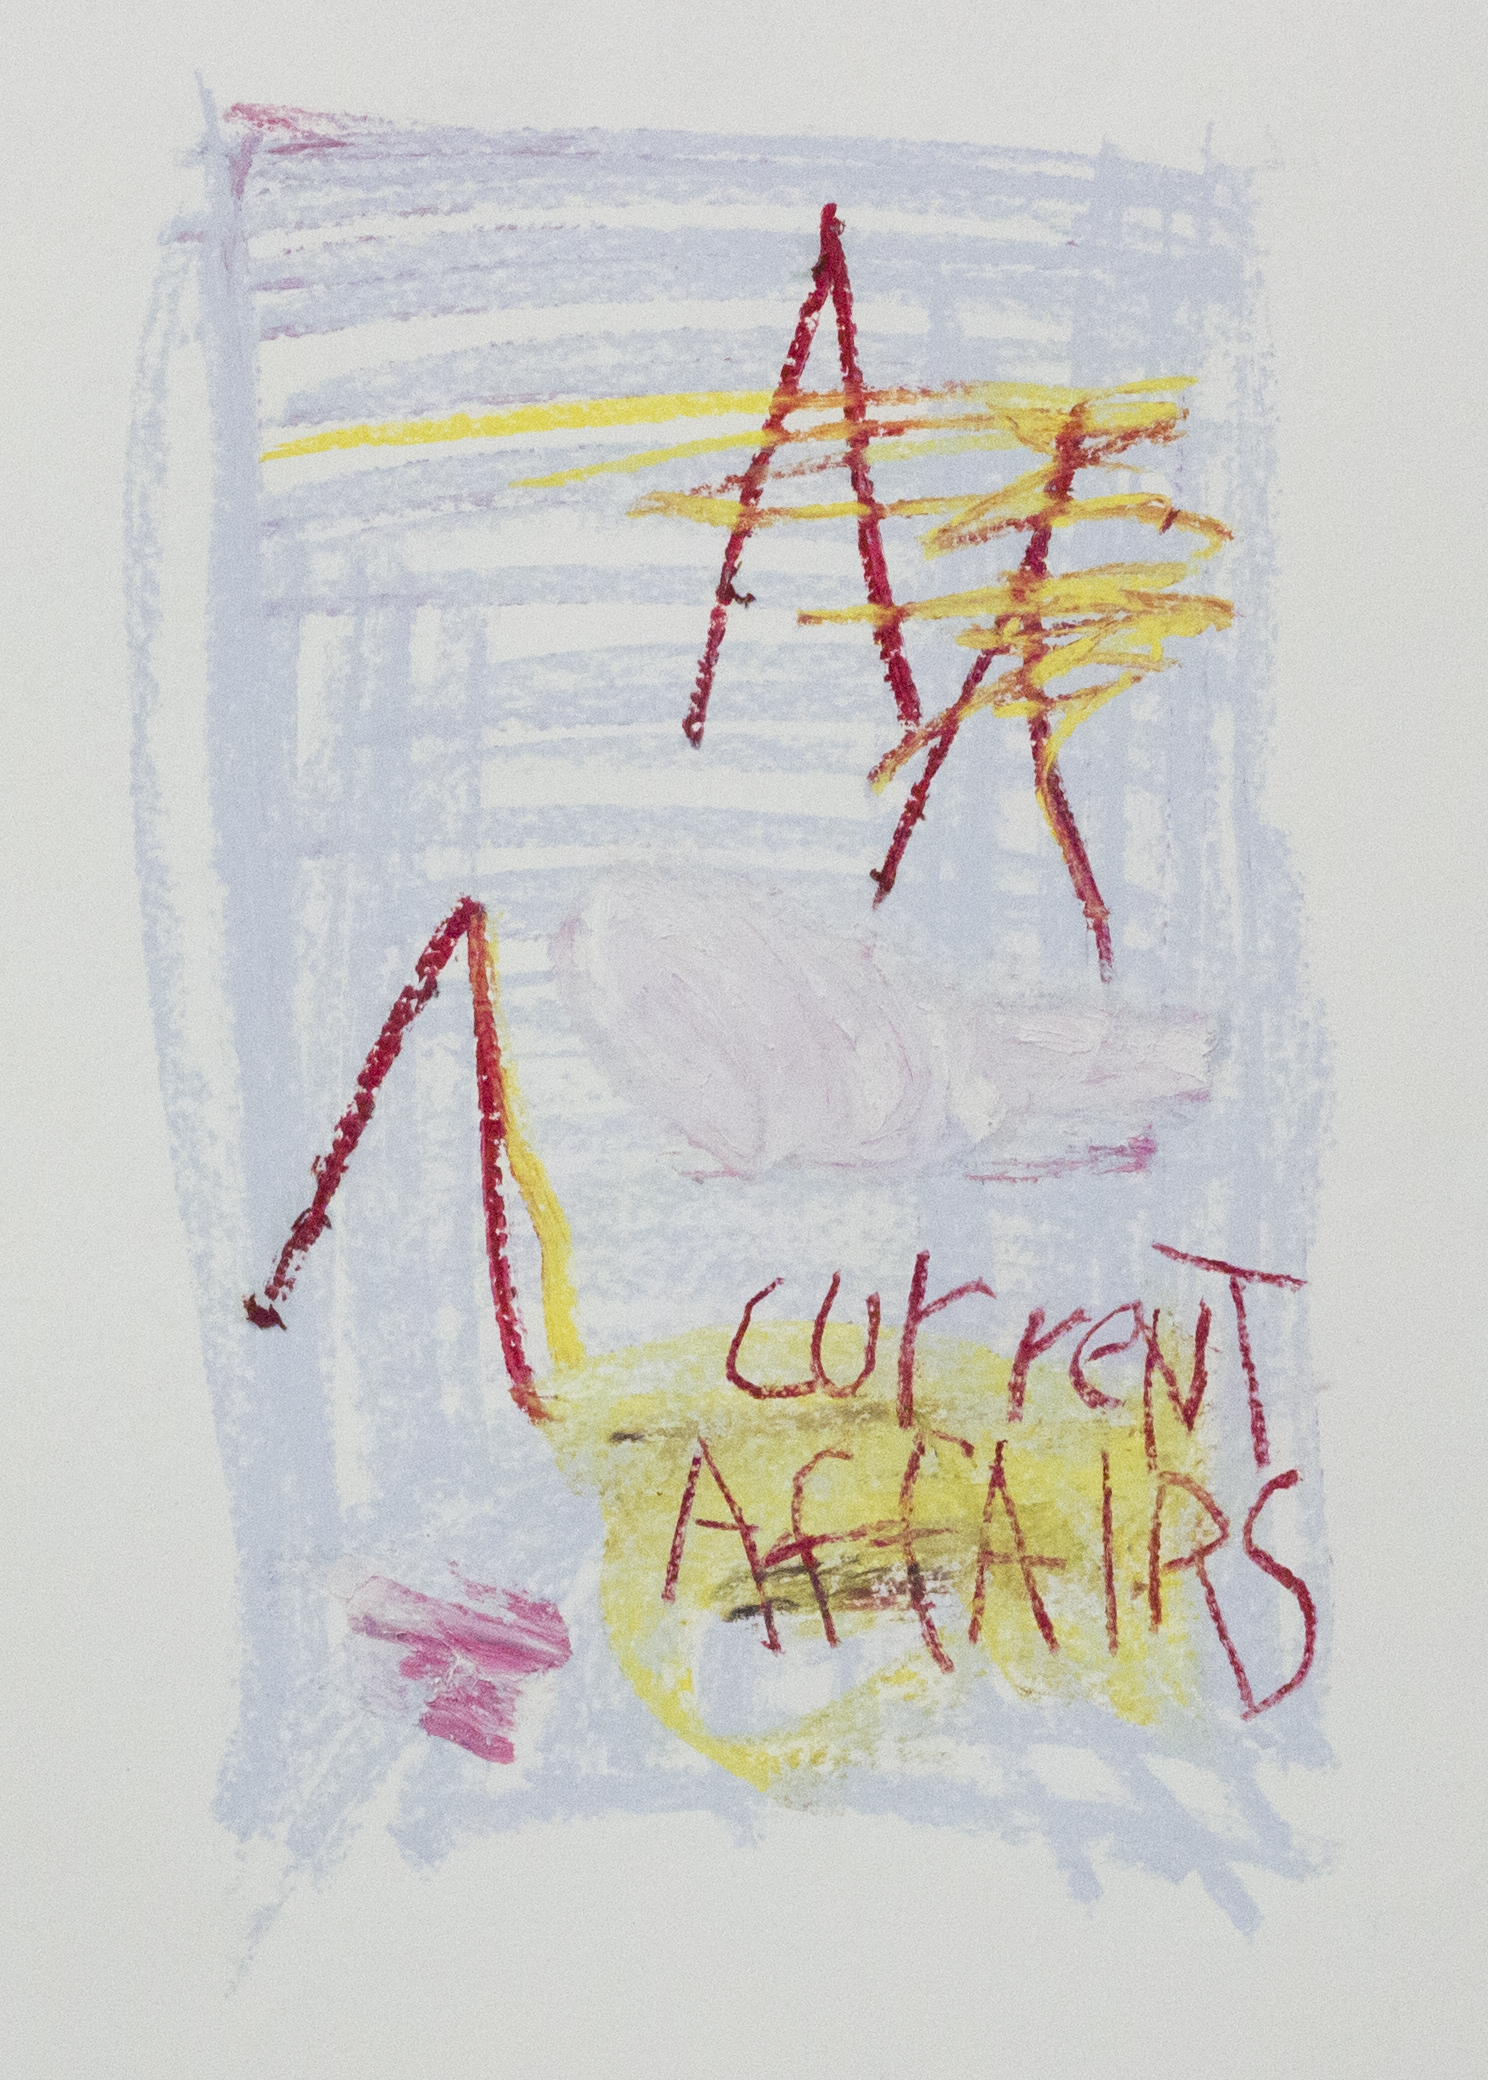   I Cannot Tell What is Mud and What is Shit  , 2015    24 x 18 inches   Oil Pastel, Crayon and Oil Stick on Paper 